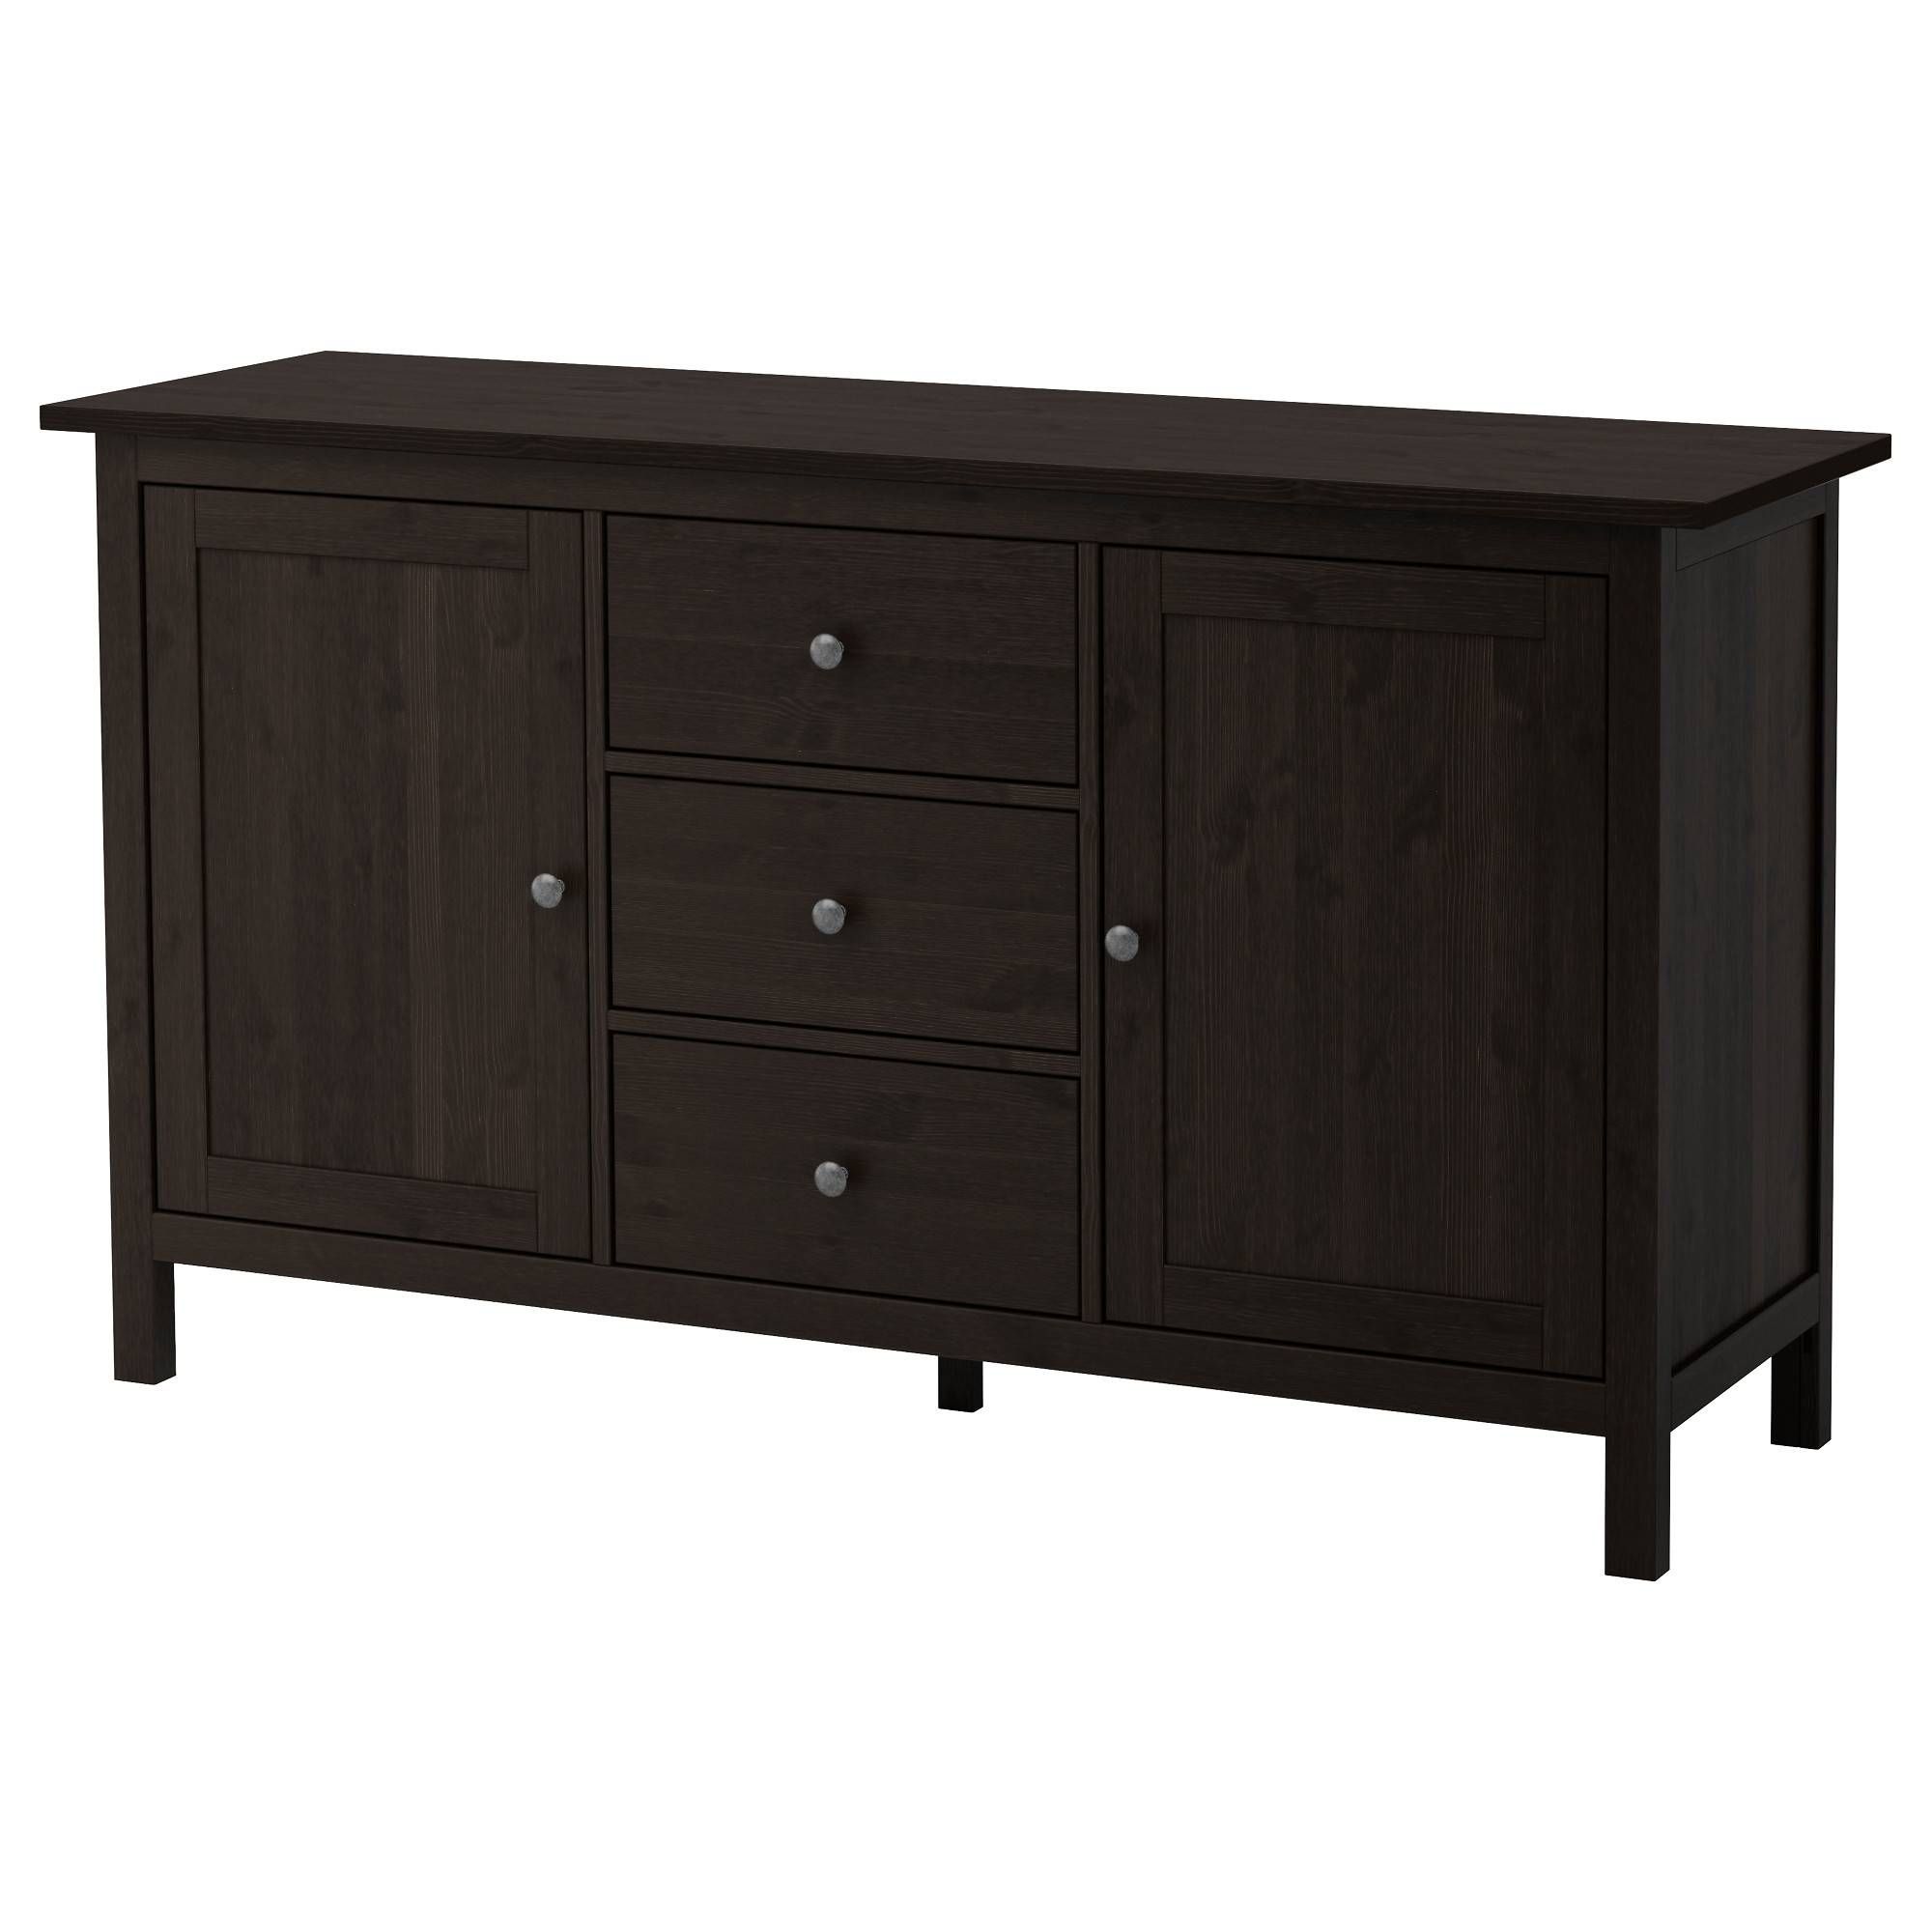 Hemnes Sideboard Black Brown 157x88 Cm – Ikea In Sideboards And Buffets Ikea (Photo 5 of 15)